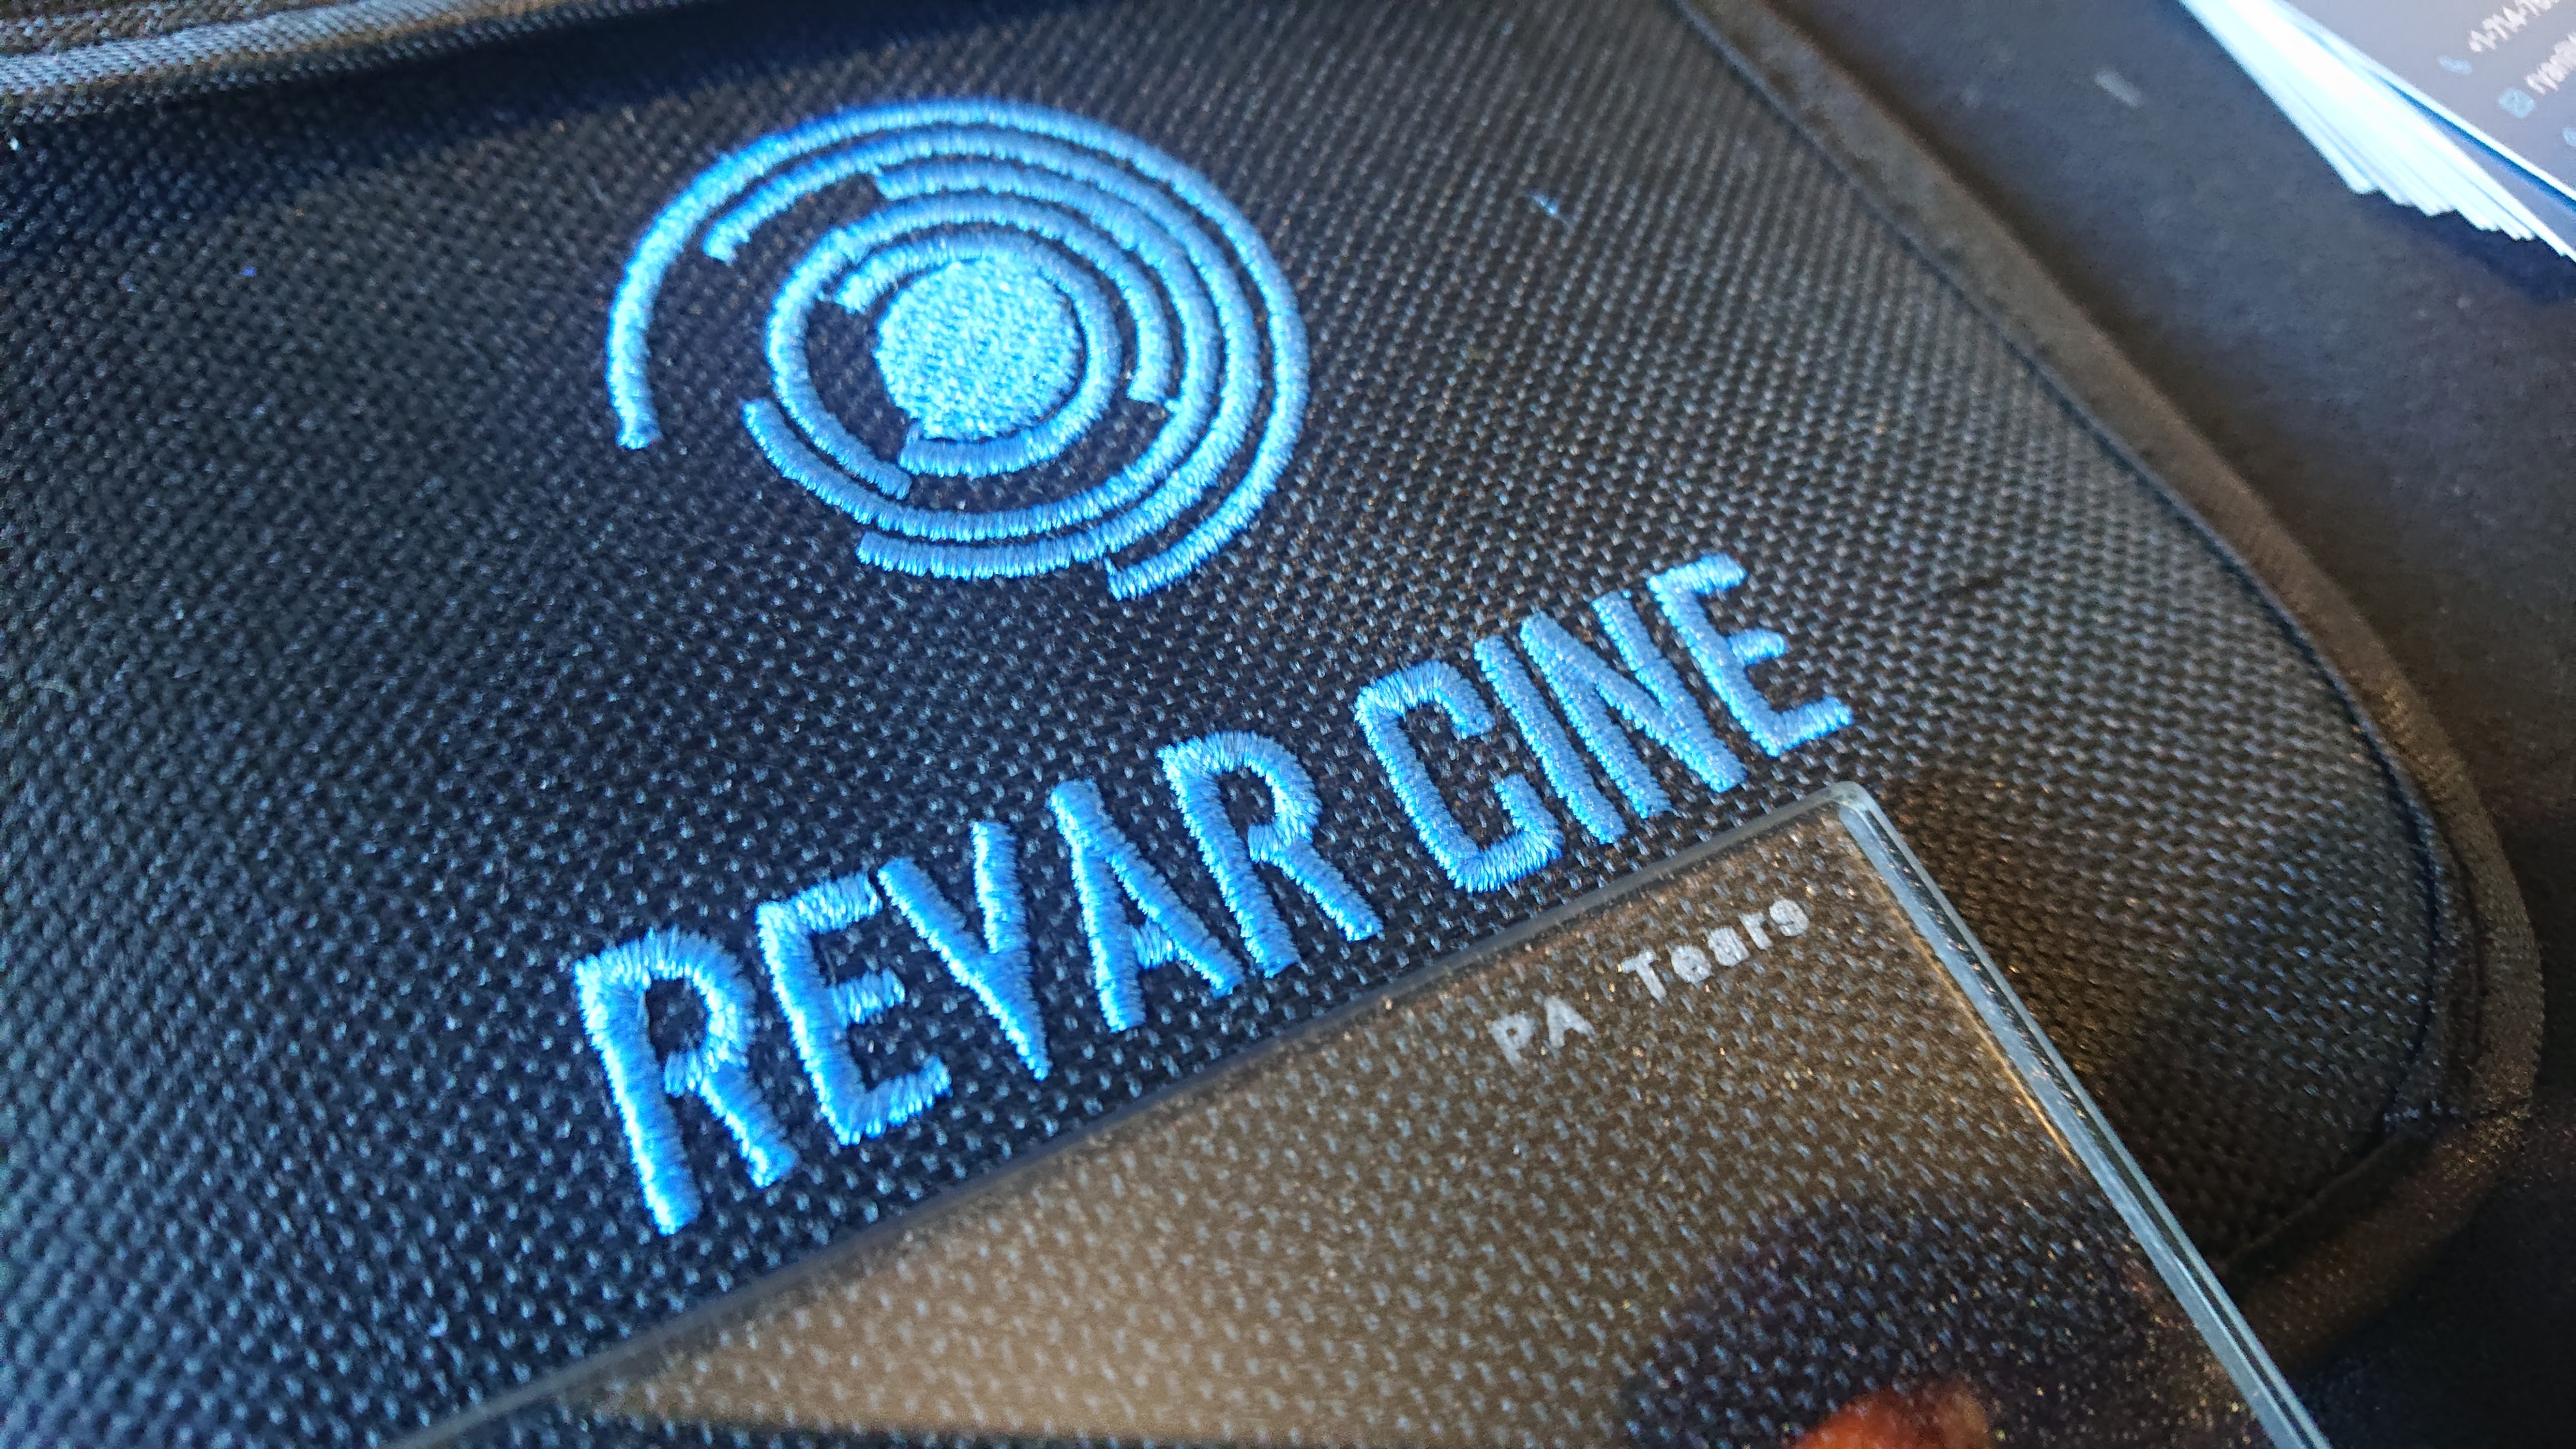 Closeup of a camera filter marked PA Tears lying on a Revar Cine filter pouch. Reflective flakes are visible in the structure of the filter.